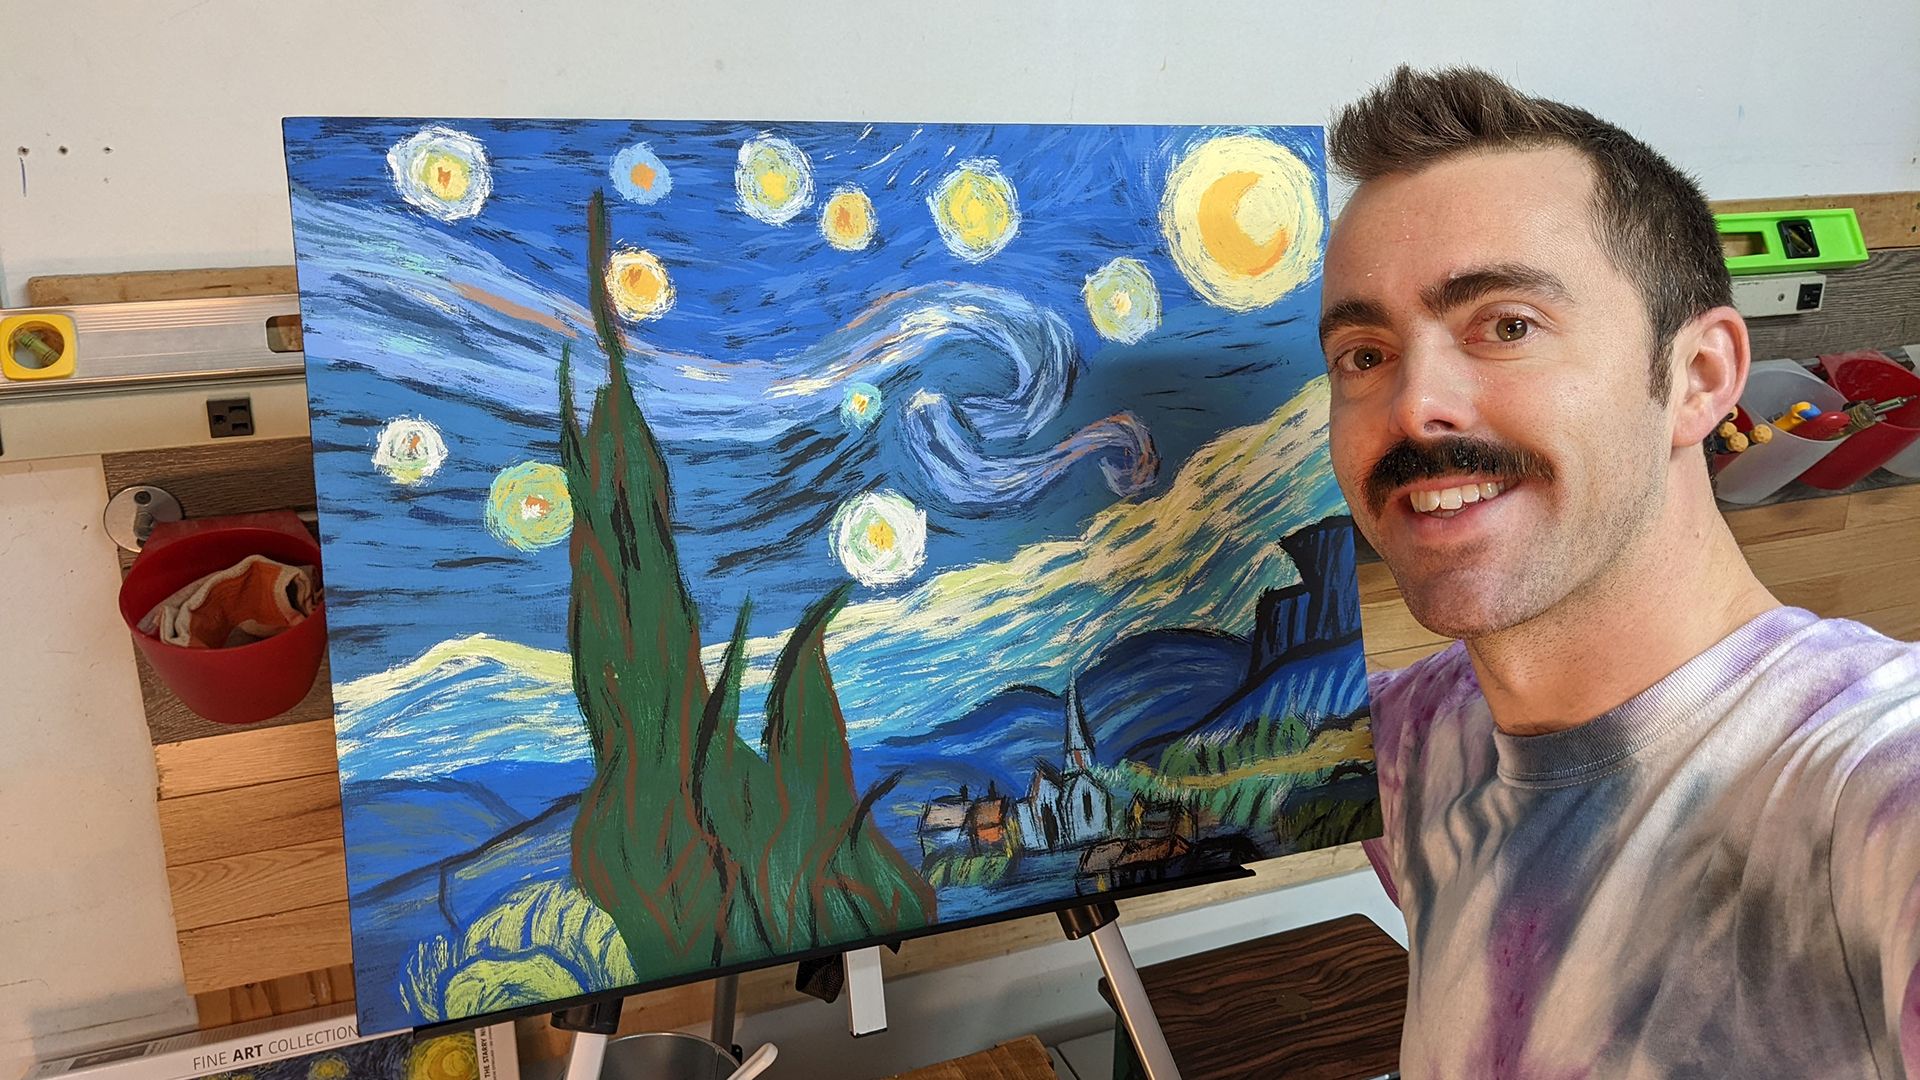 A moustachioed man poses with Van Gogh's Starry Night painting (a swirl of blue and yellow) -- a painting that he painted with his moustache as the brush